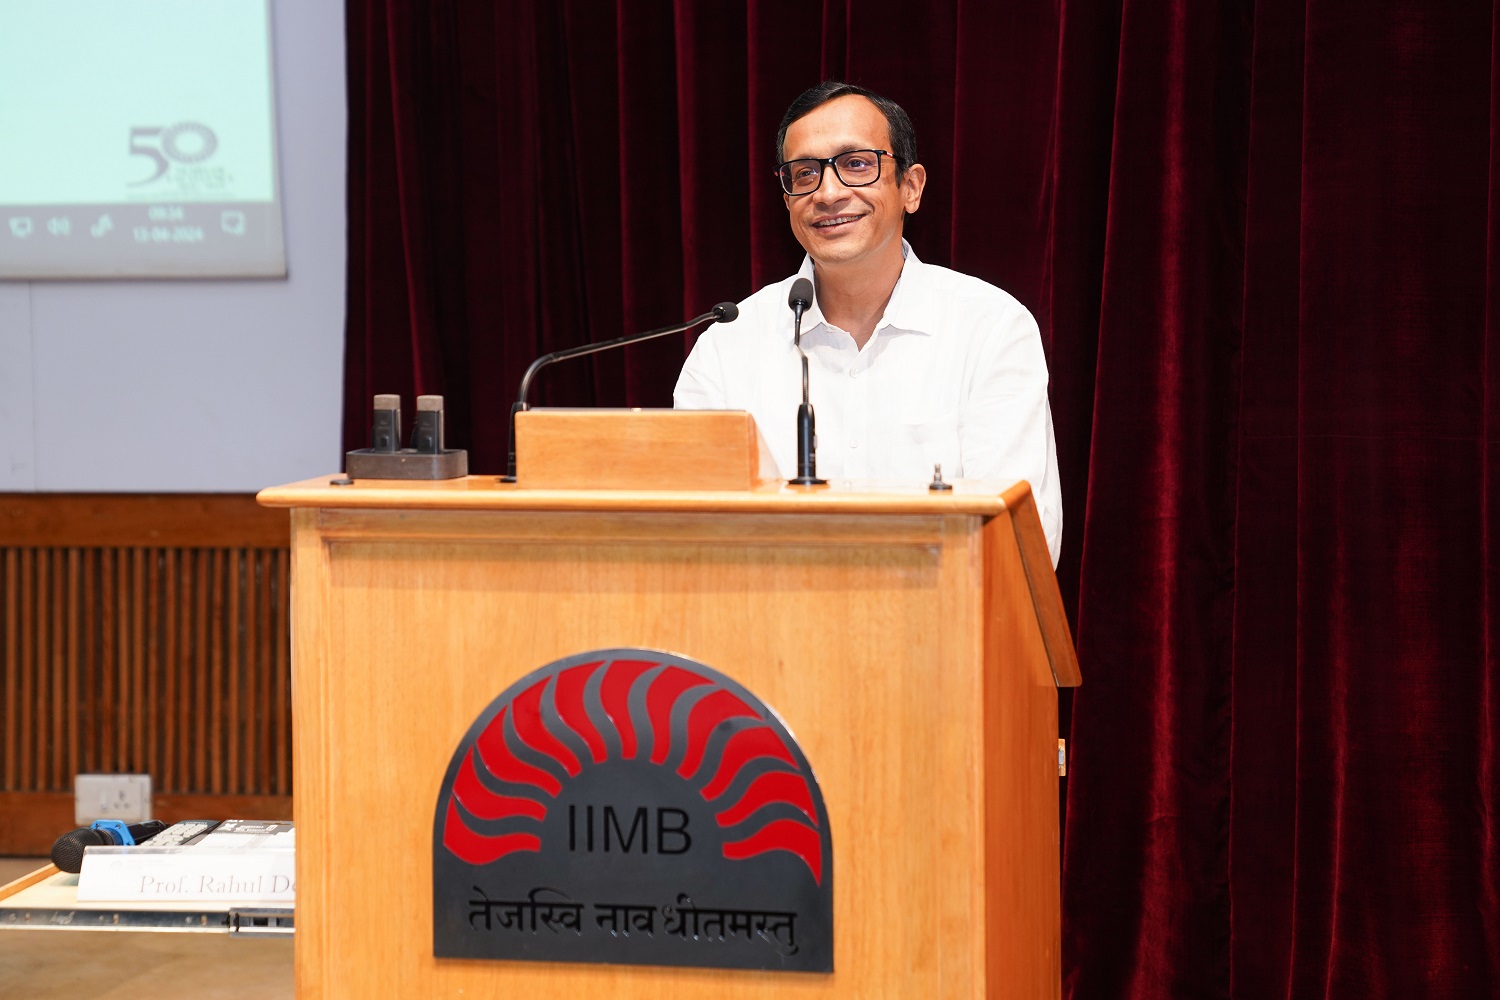 Prof. Ashis Mishra, Chairperson of the Post Graduate Programme in Enterprise Management and faculty of the Marketing area of IIMB, gave the address. He said to the PGPEM Class of 2024-26 that their two-year MBA journey at IIMB would be tough, but transformative.